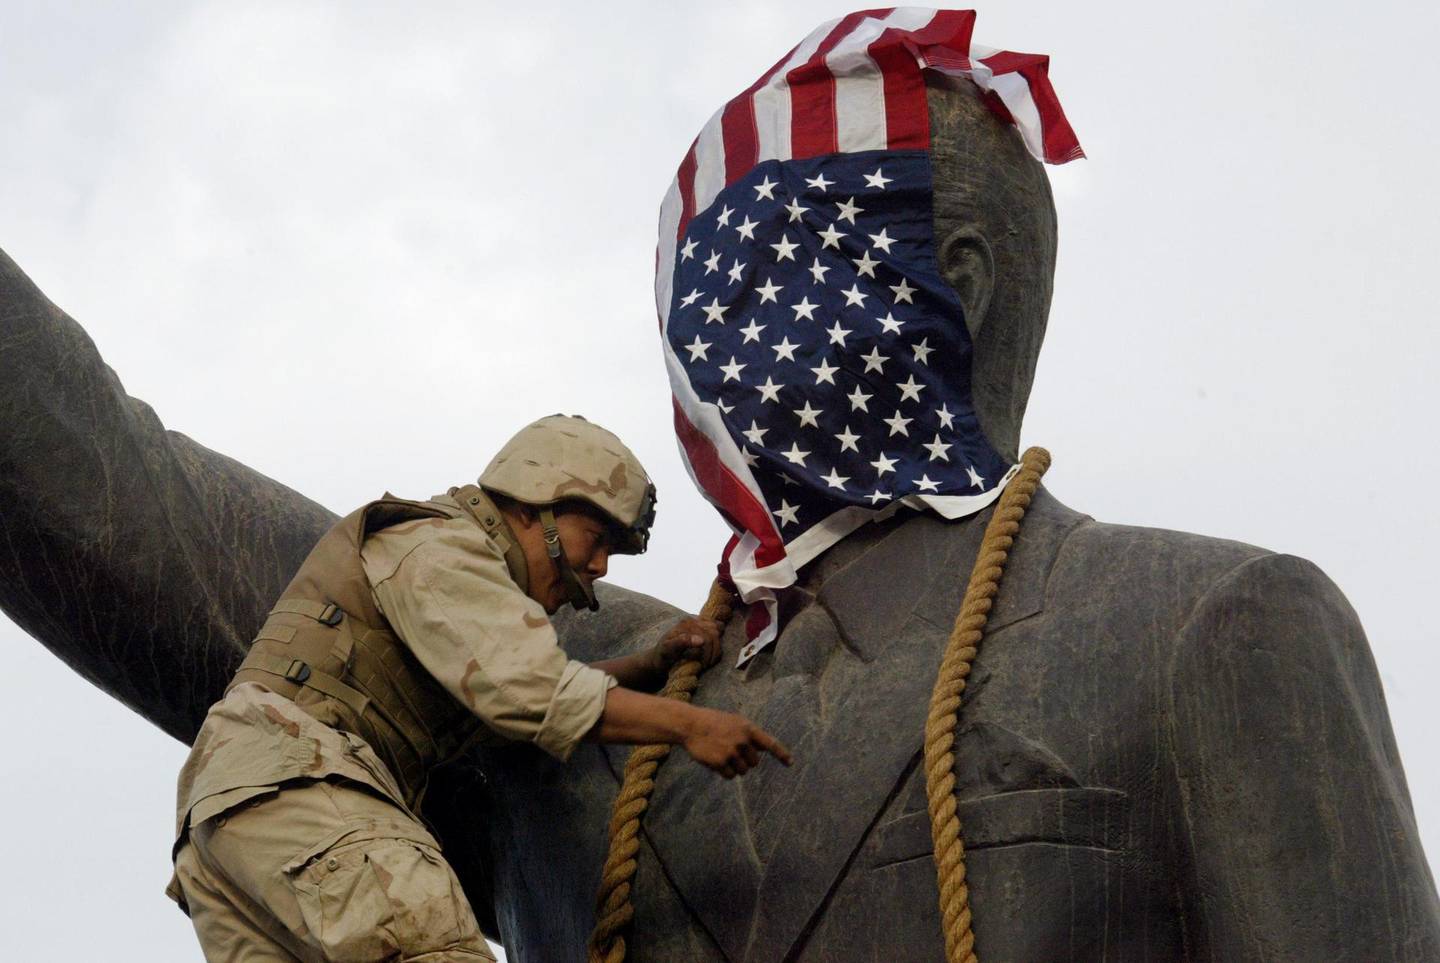 (FILES) In this file photo taken on April 9, 2003 A US Marine covers the head of a statue of Iraqi President Saddam Hussein with the US flag before pulling it down in Baghdad's al-Fardous (paradise) square as the marines swept into the Iraqi capital and the Iraqi leader's regime collapsed.
On April 9, 2003, the US-led coalition overthrew Saddam Hussein. Fifteen years after the invasion, life in Iraq has been transformed as sectarian clashes and jihadist attacks have divided families and killed tens of thousands of people, leaving behind wounds that have yet to heal and a lagging economy. / AFP PHOTO / RAMZI HAIDAR